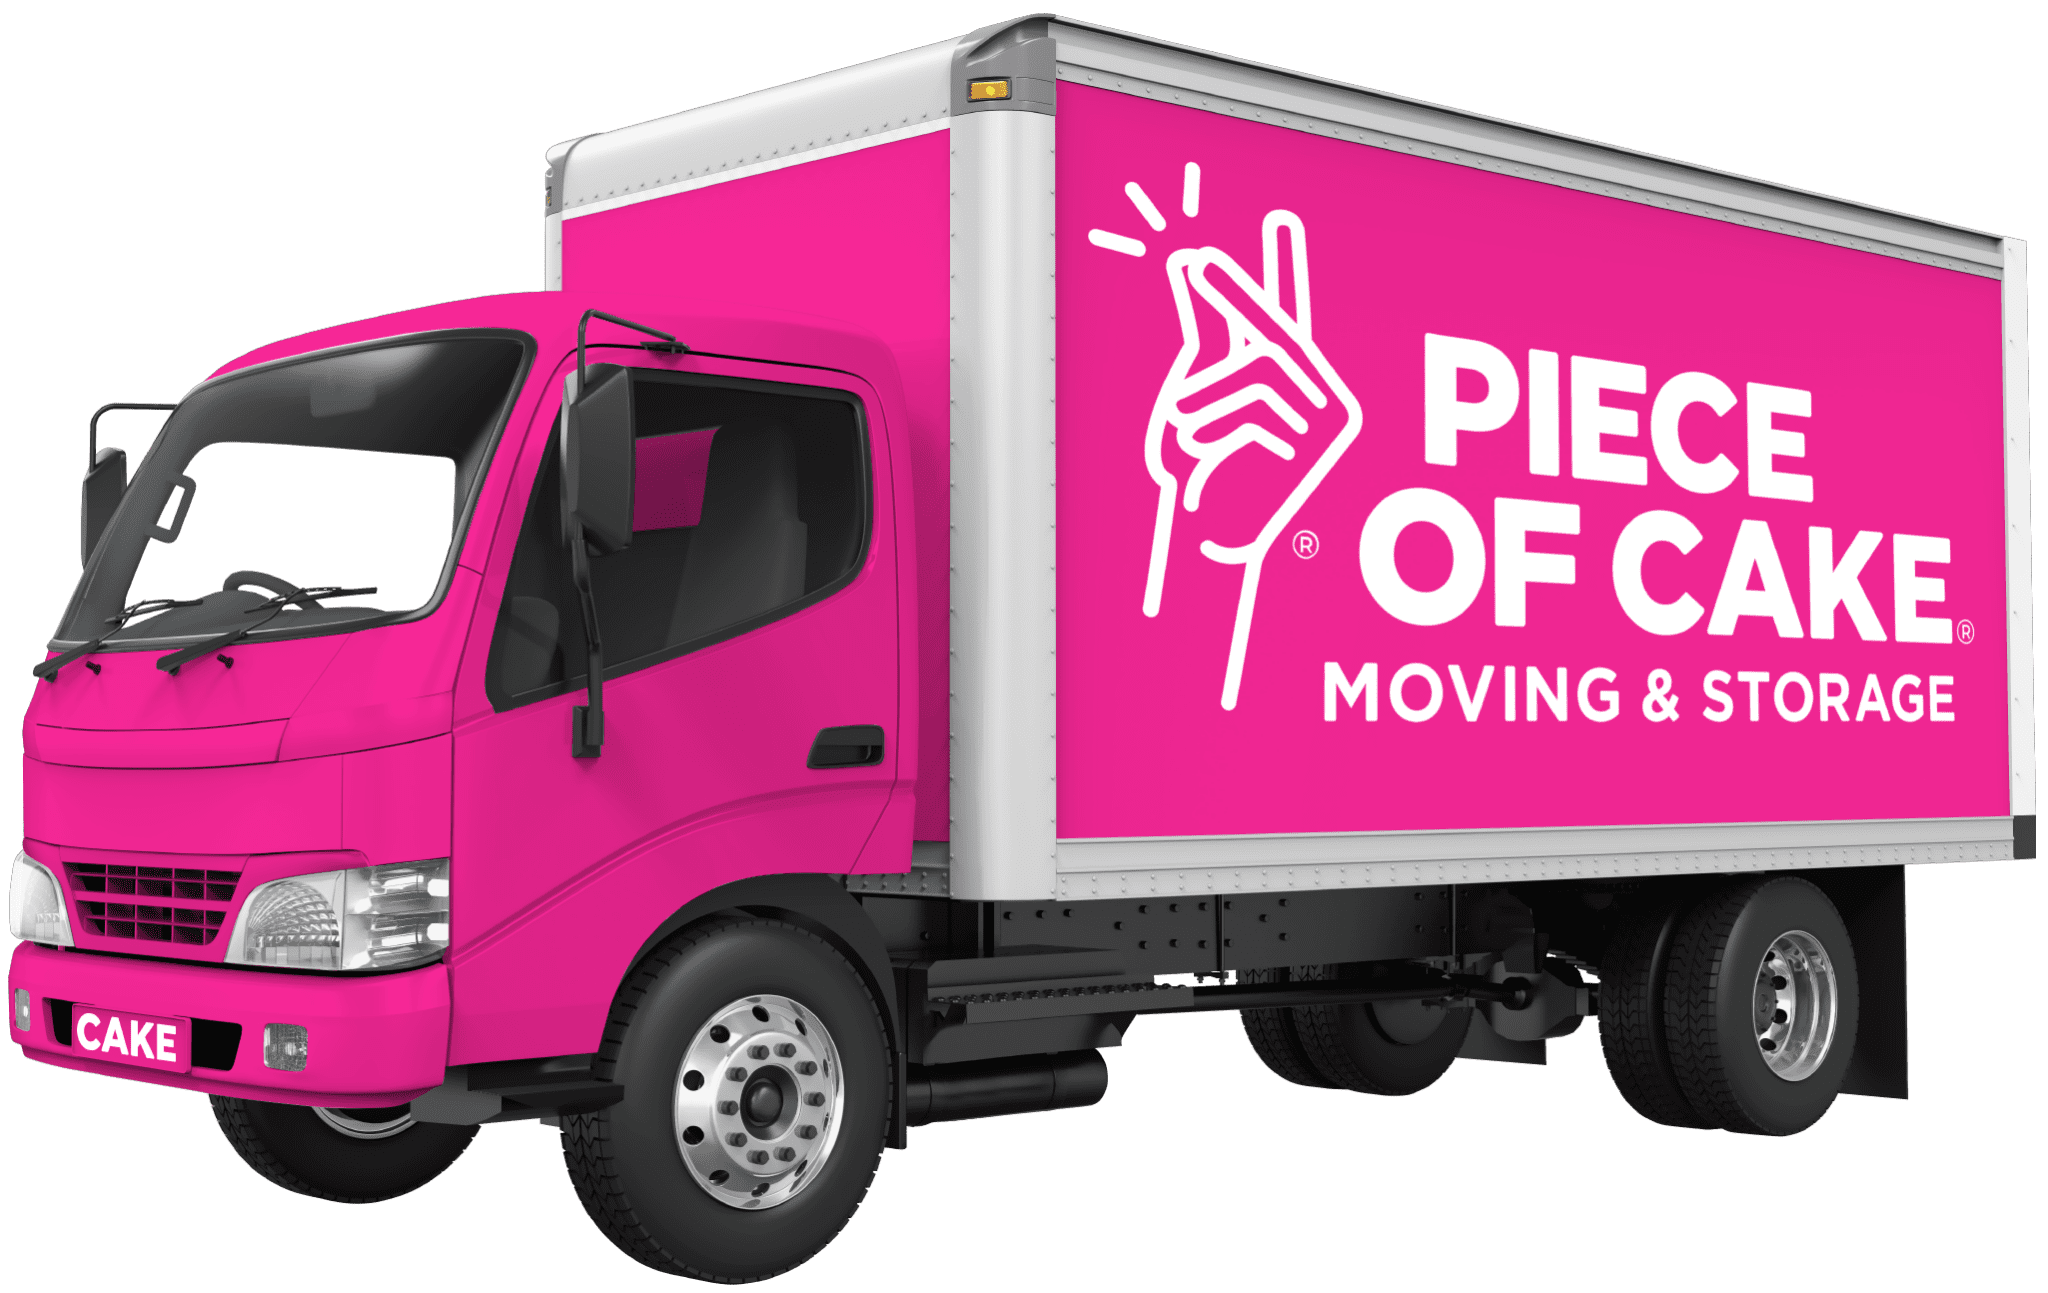 Pink Piece of Cake Moving & Storage truck